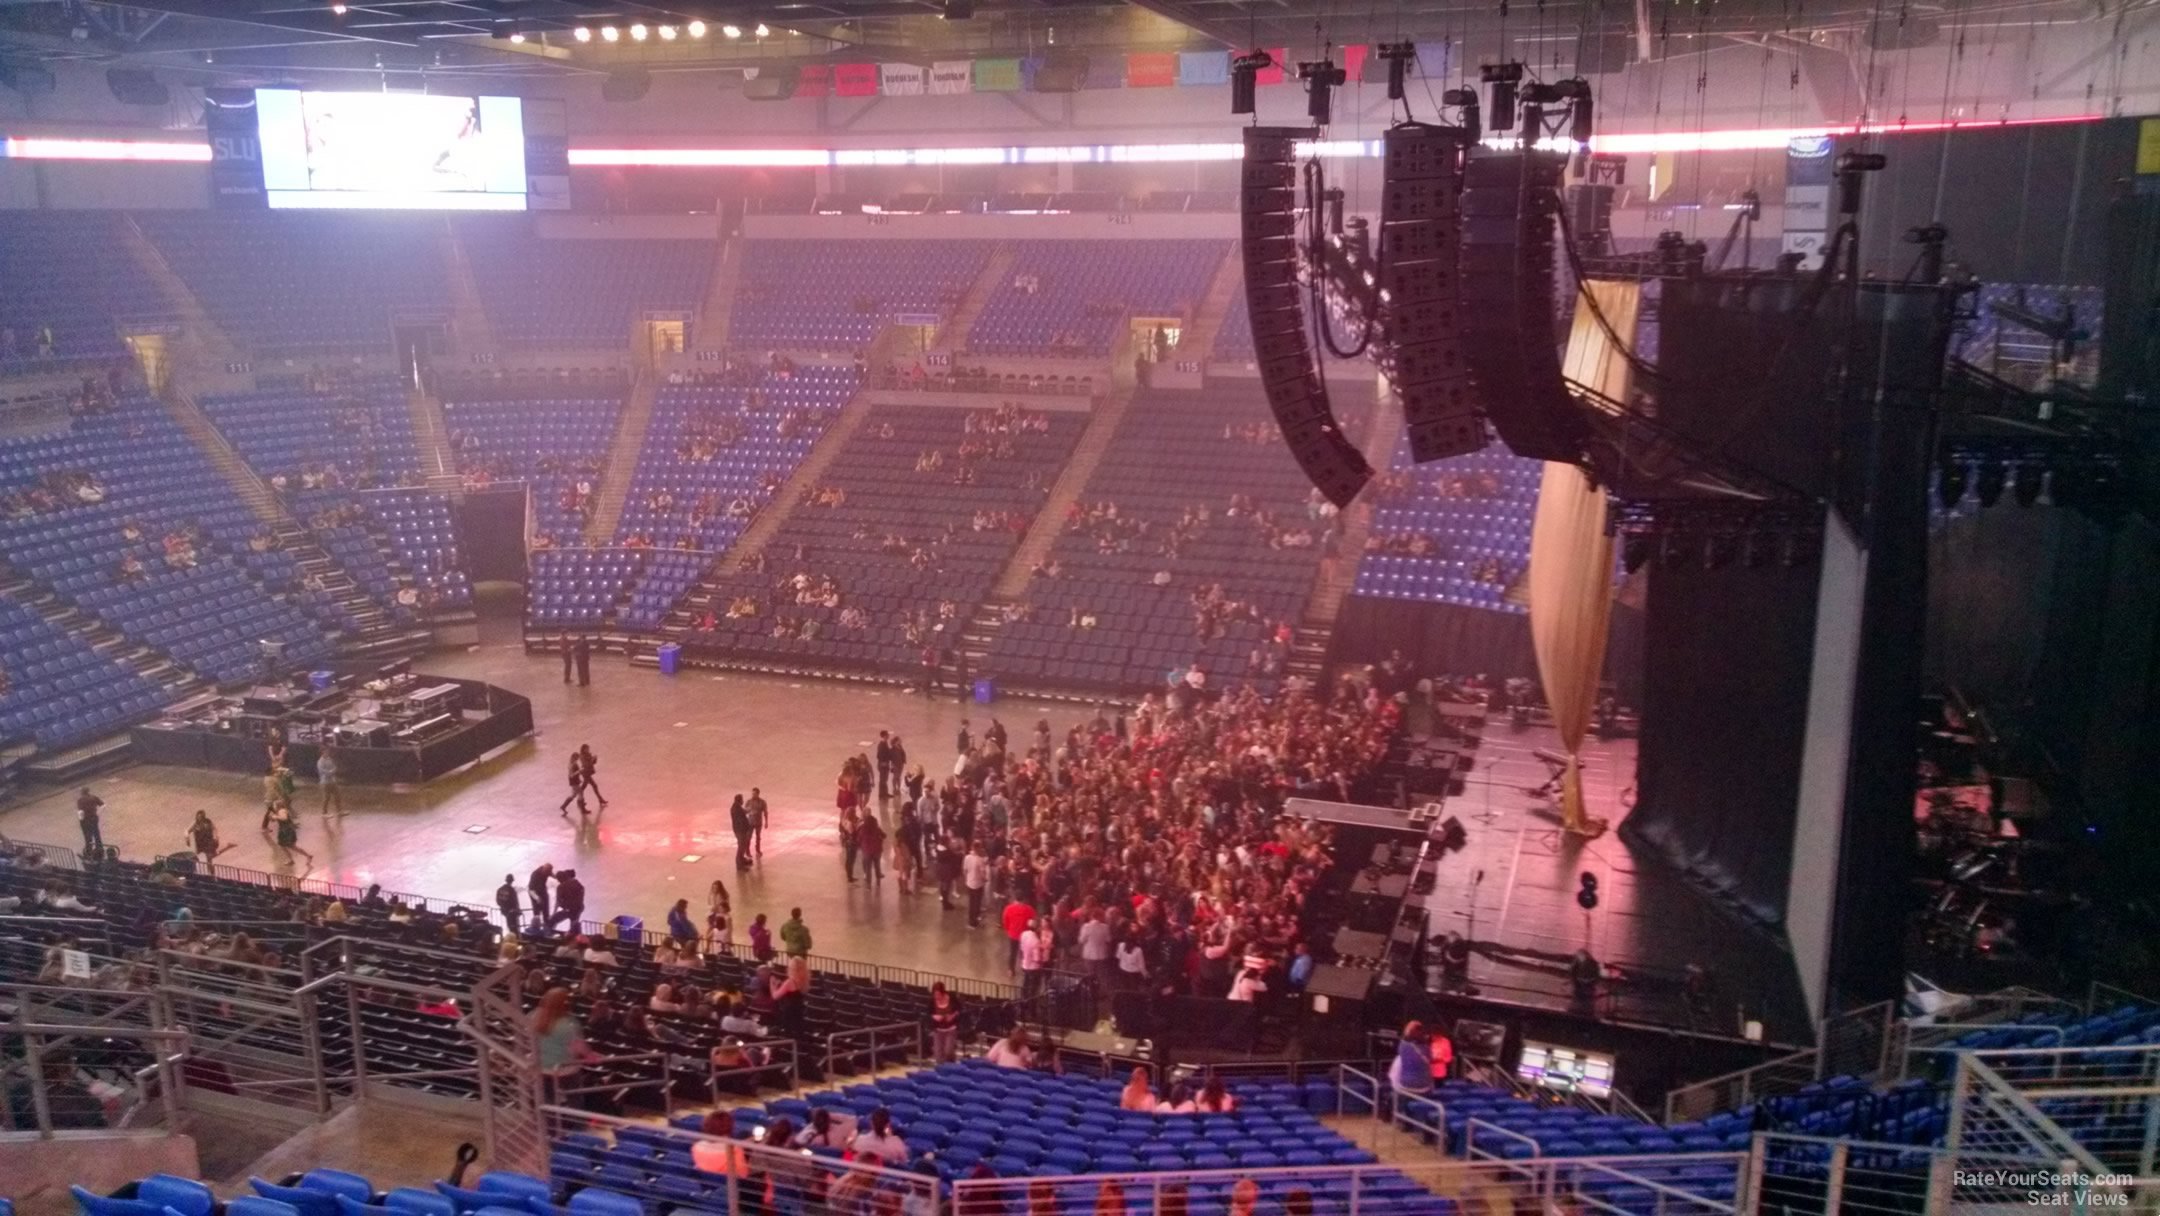 section 202, row j seat view  for concert - chaifetz arena